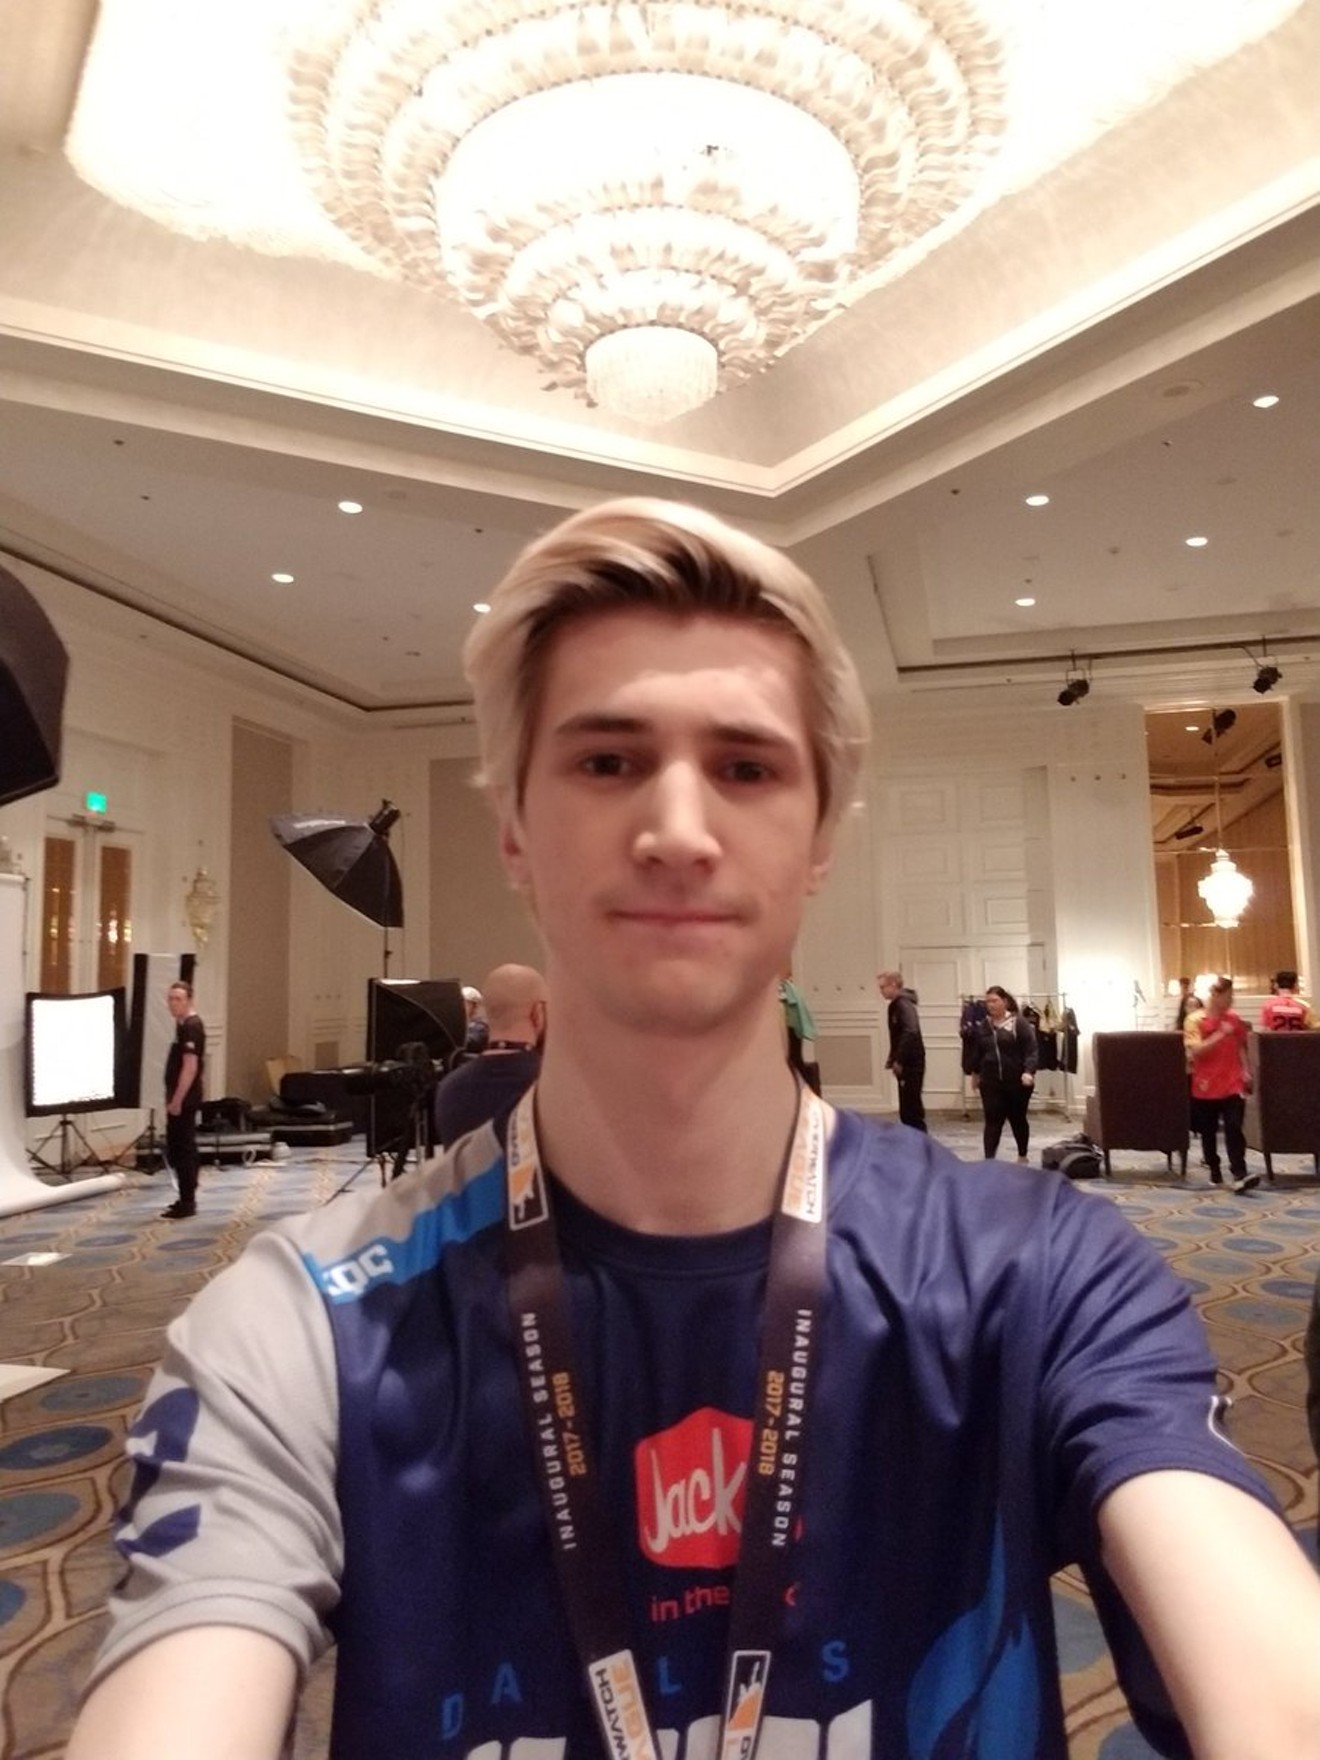 Dallas Fuel player Felix Lengyel will miss the first stage of play in the Overwatch League and pay a $2,000 fine for a homophobic slur he made against an openly gay player on his Twitch stream.